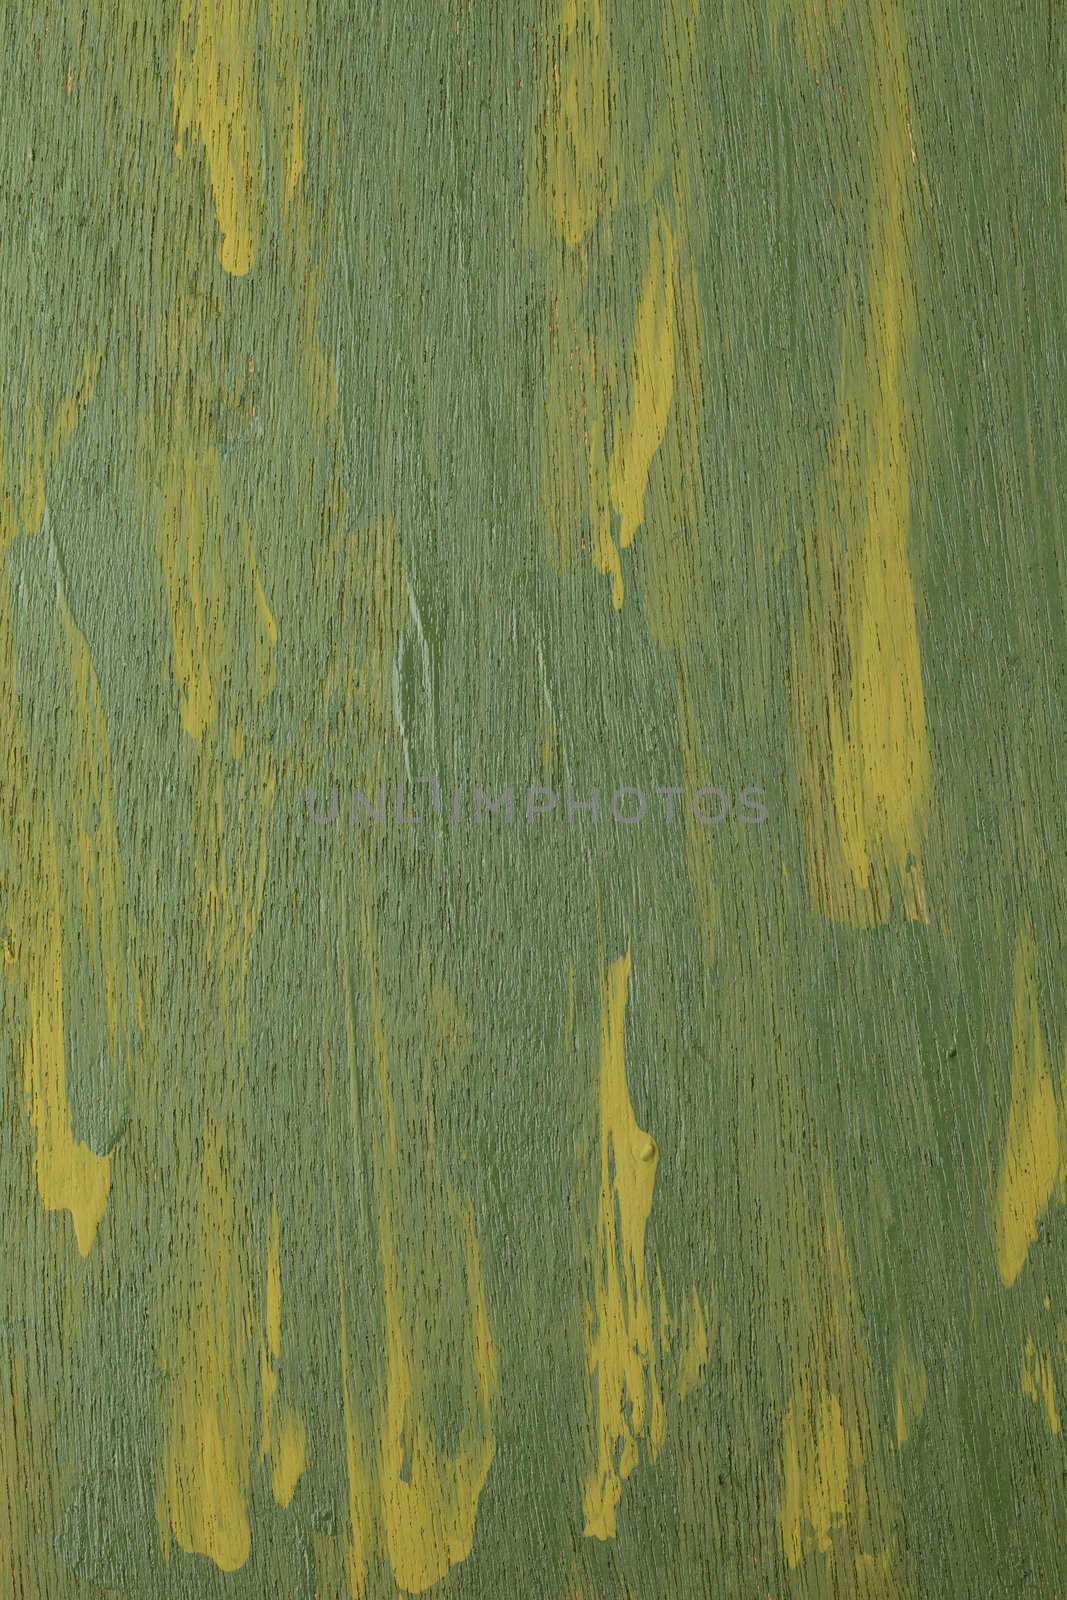 green abstract painted  on wood by PixelsAway